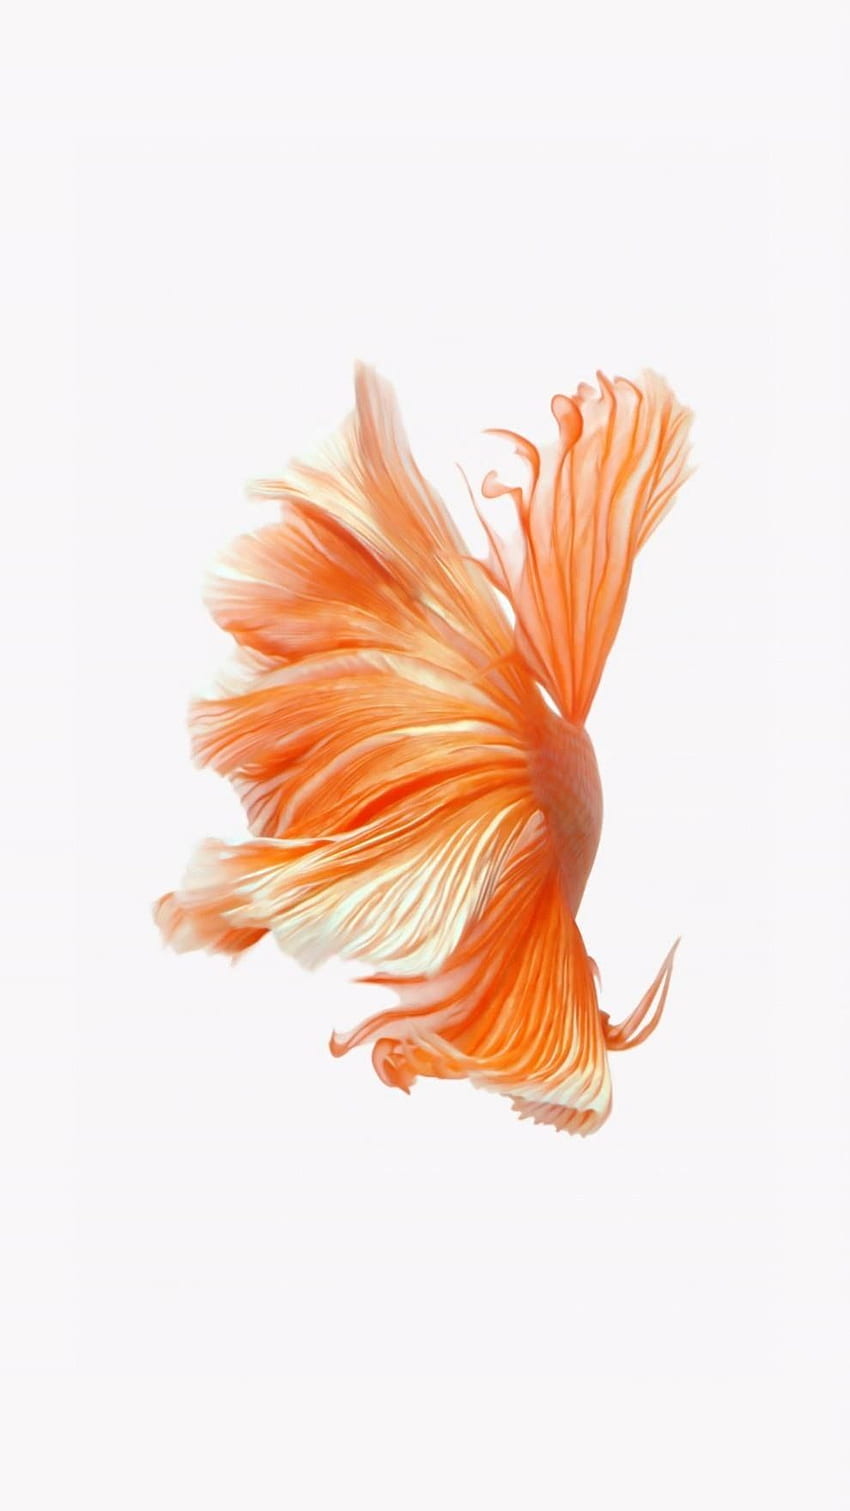 How to Get Apple's Live Fish Back on Your iPhone in iOS, Custom 5S Dynamic HD phone wallpaper